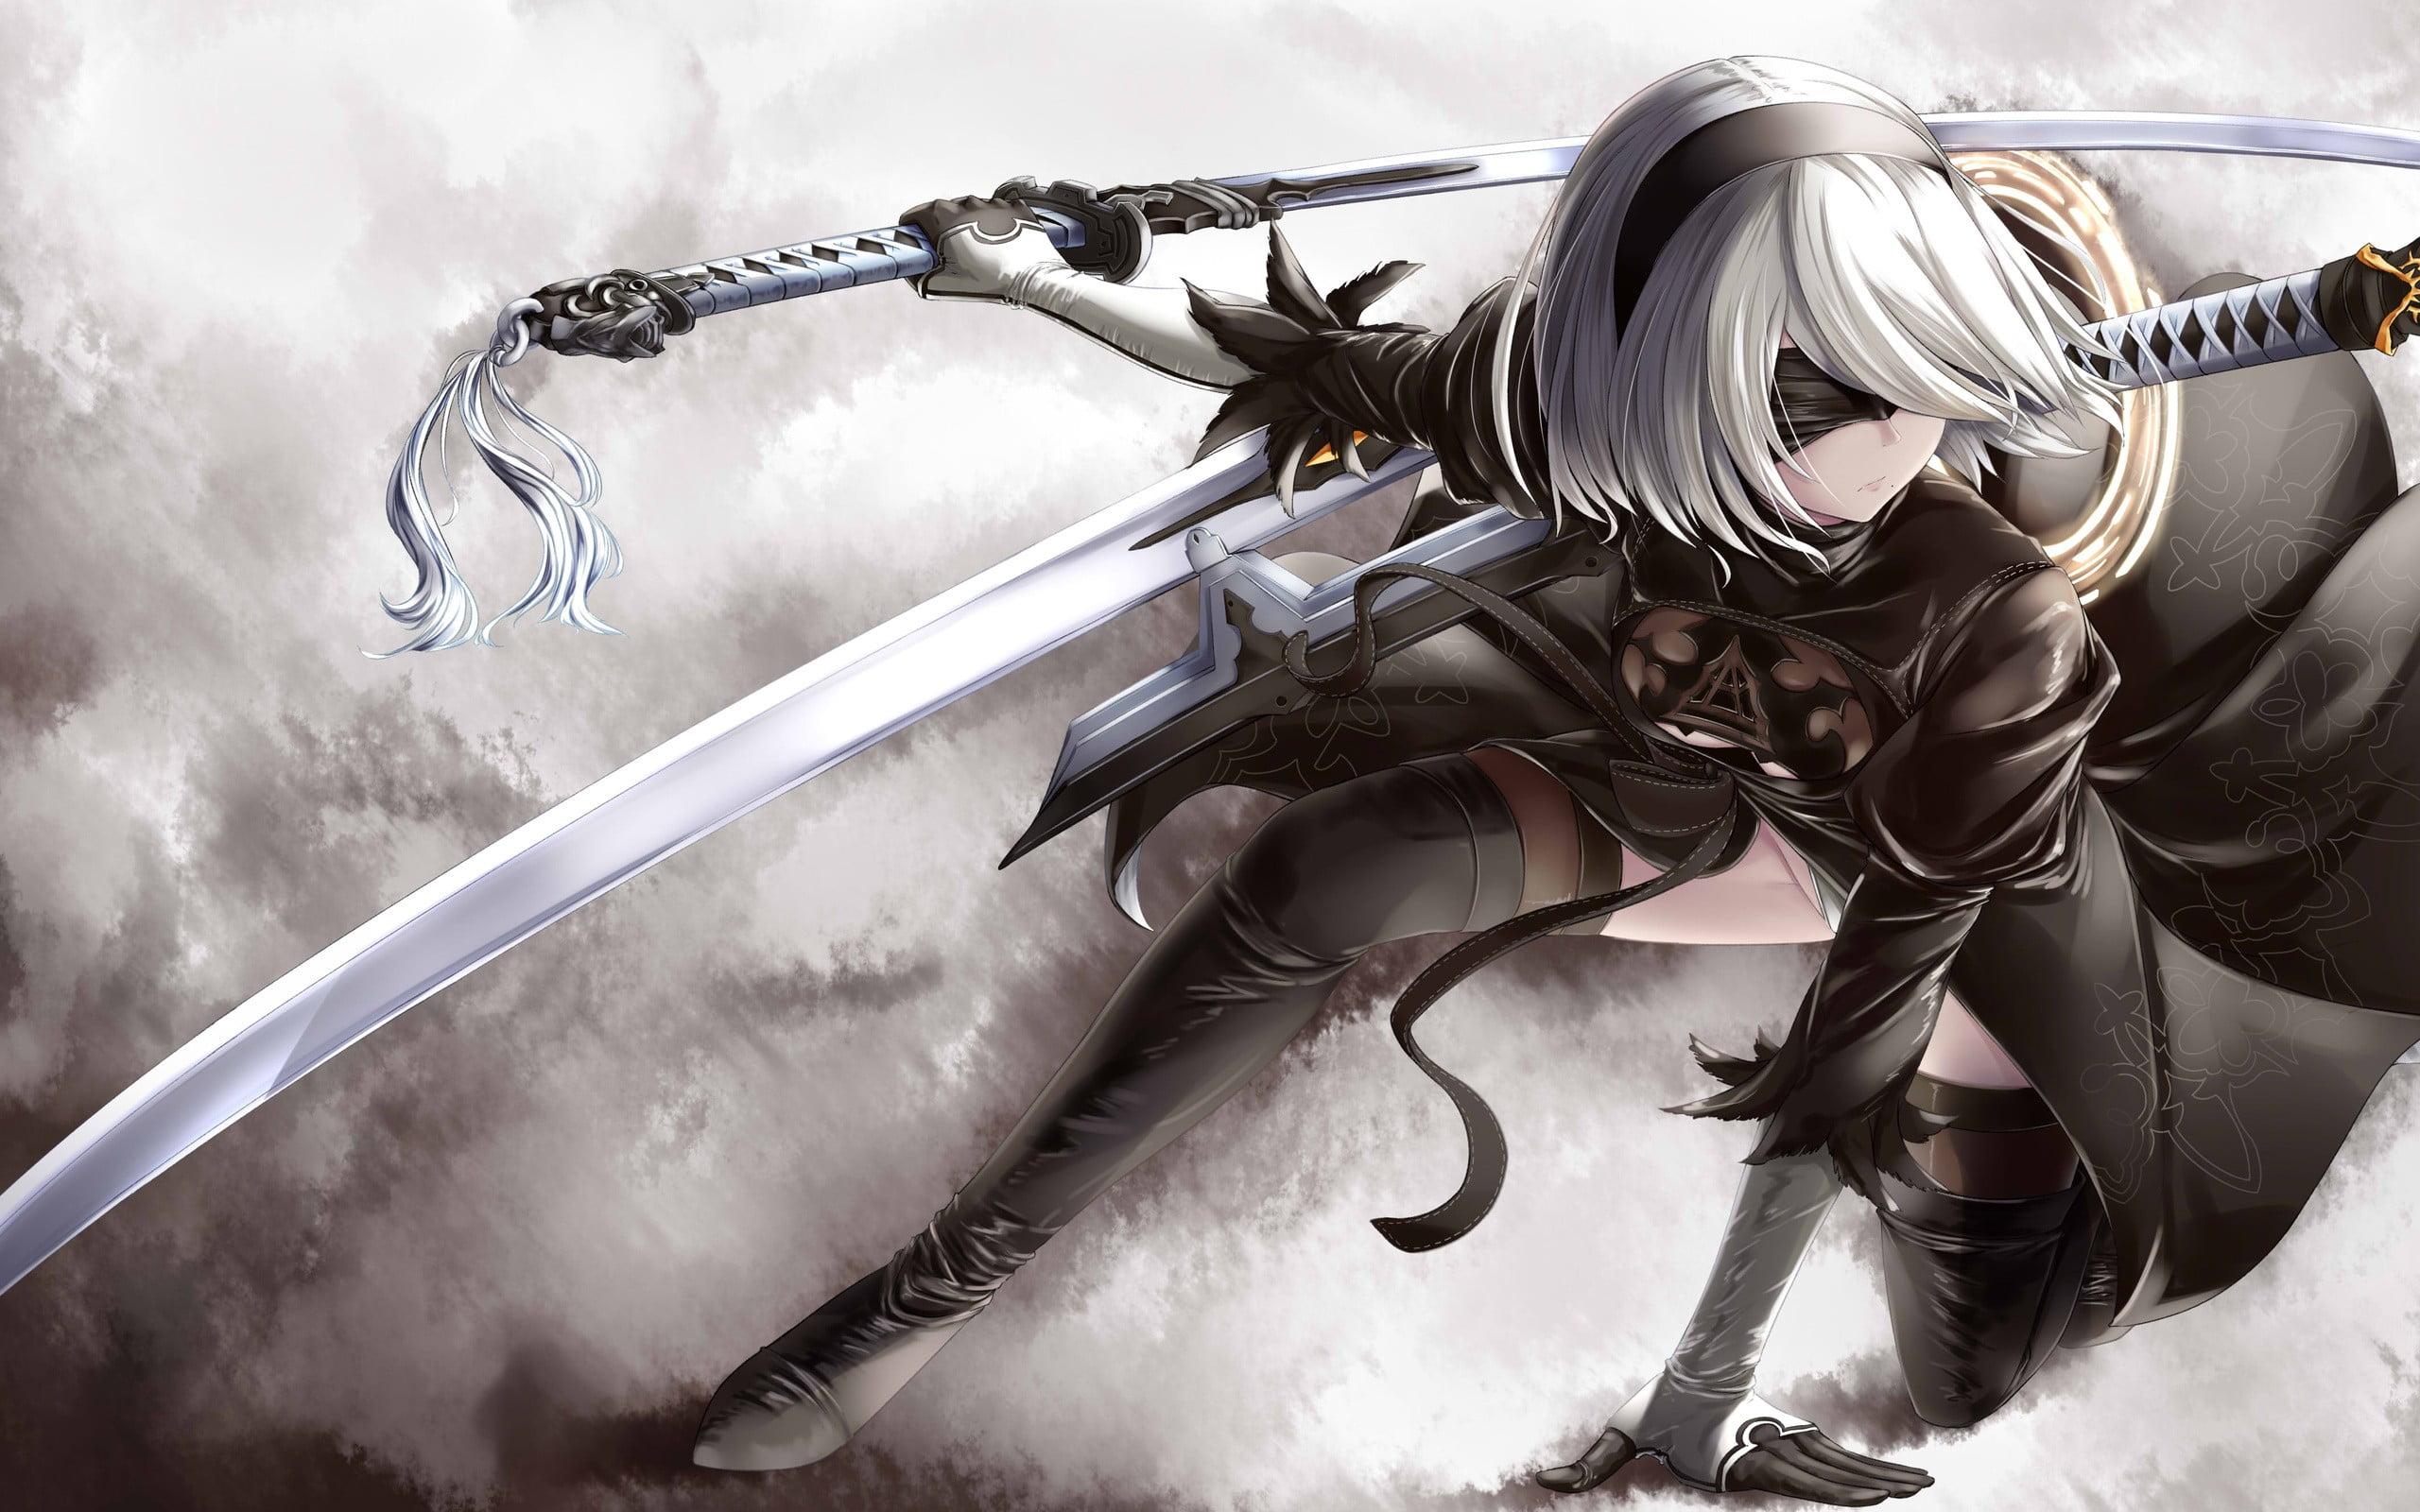 Gray and white haired swordsman anime character, Nier: Automata